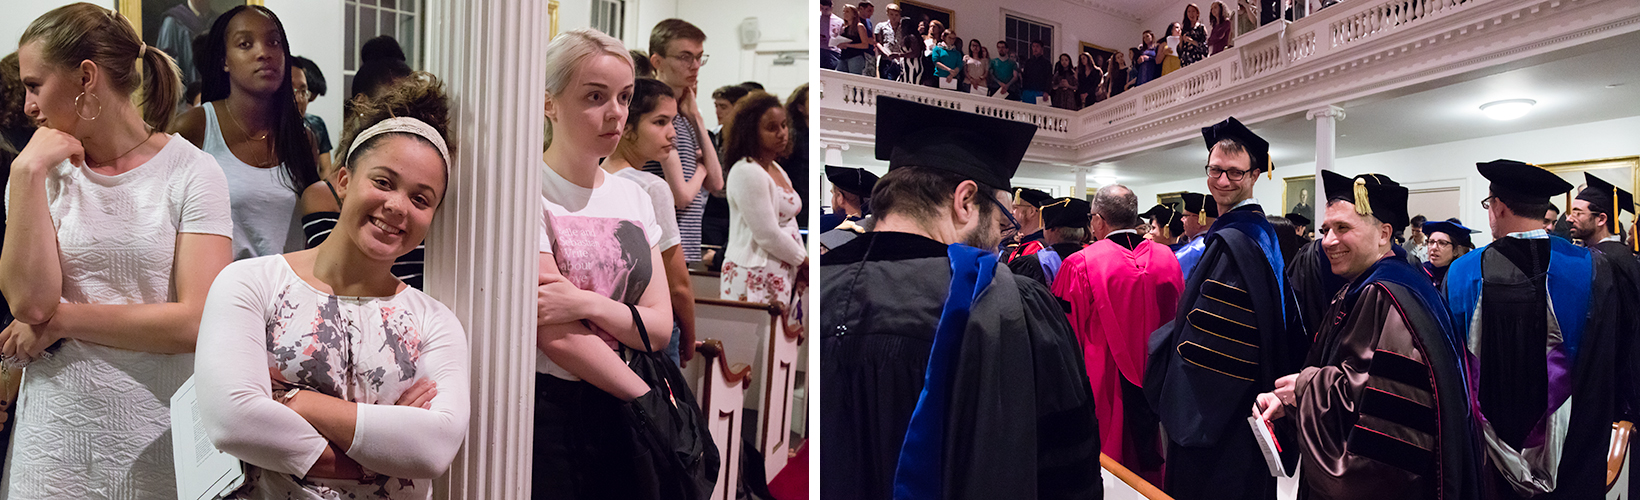 The crowd during the Convocation ceremony in Johnson Chapel